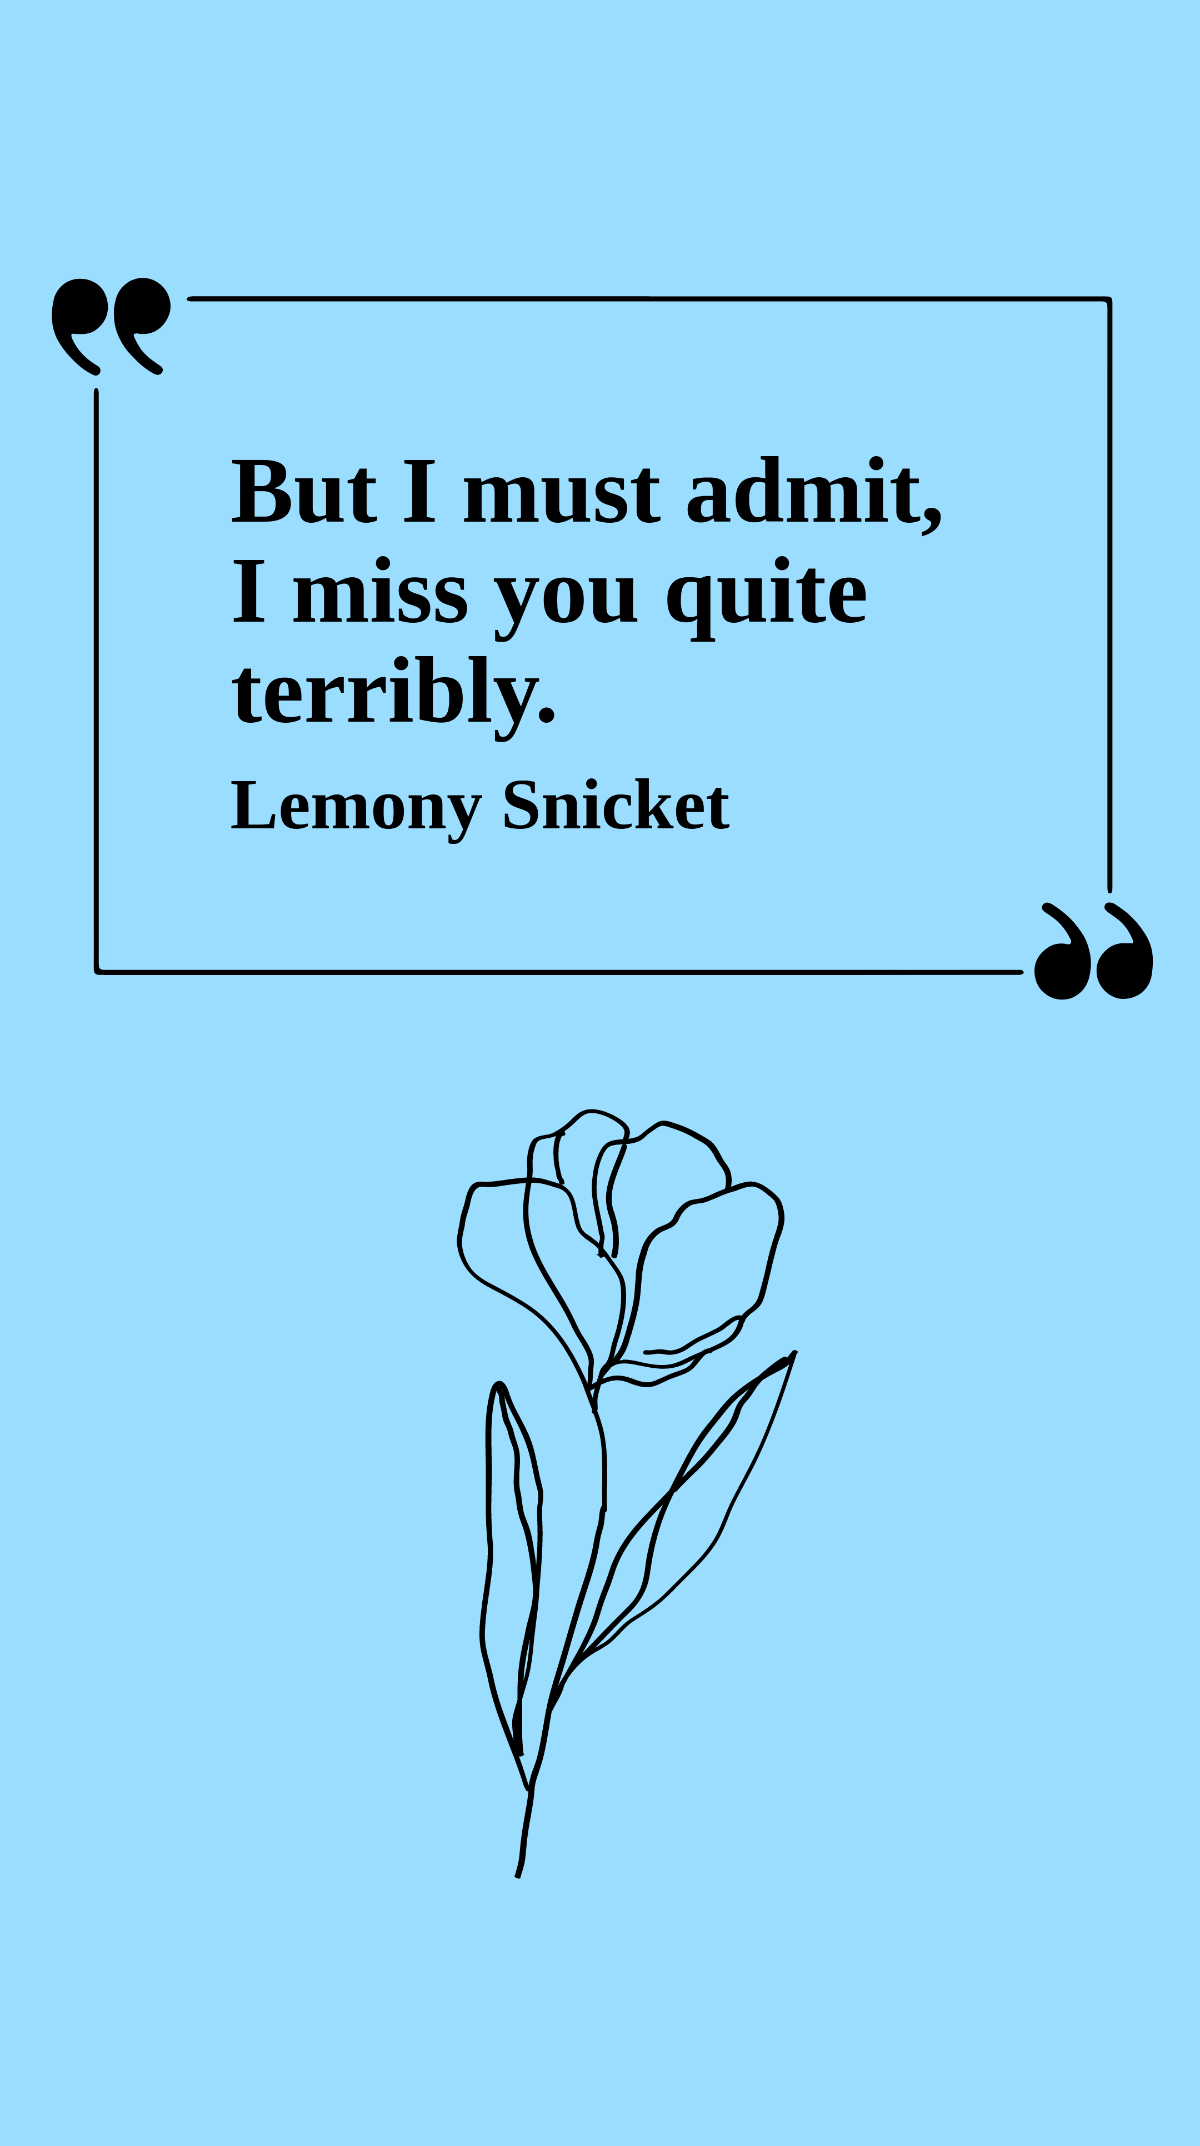 Lemony Snicket, The Beatrice Letters - But I must admit, I miss you quite terribly. Template